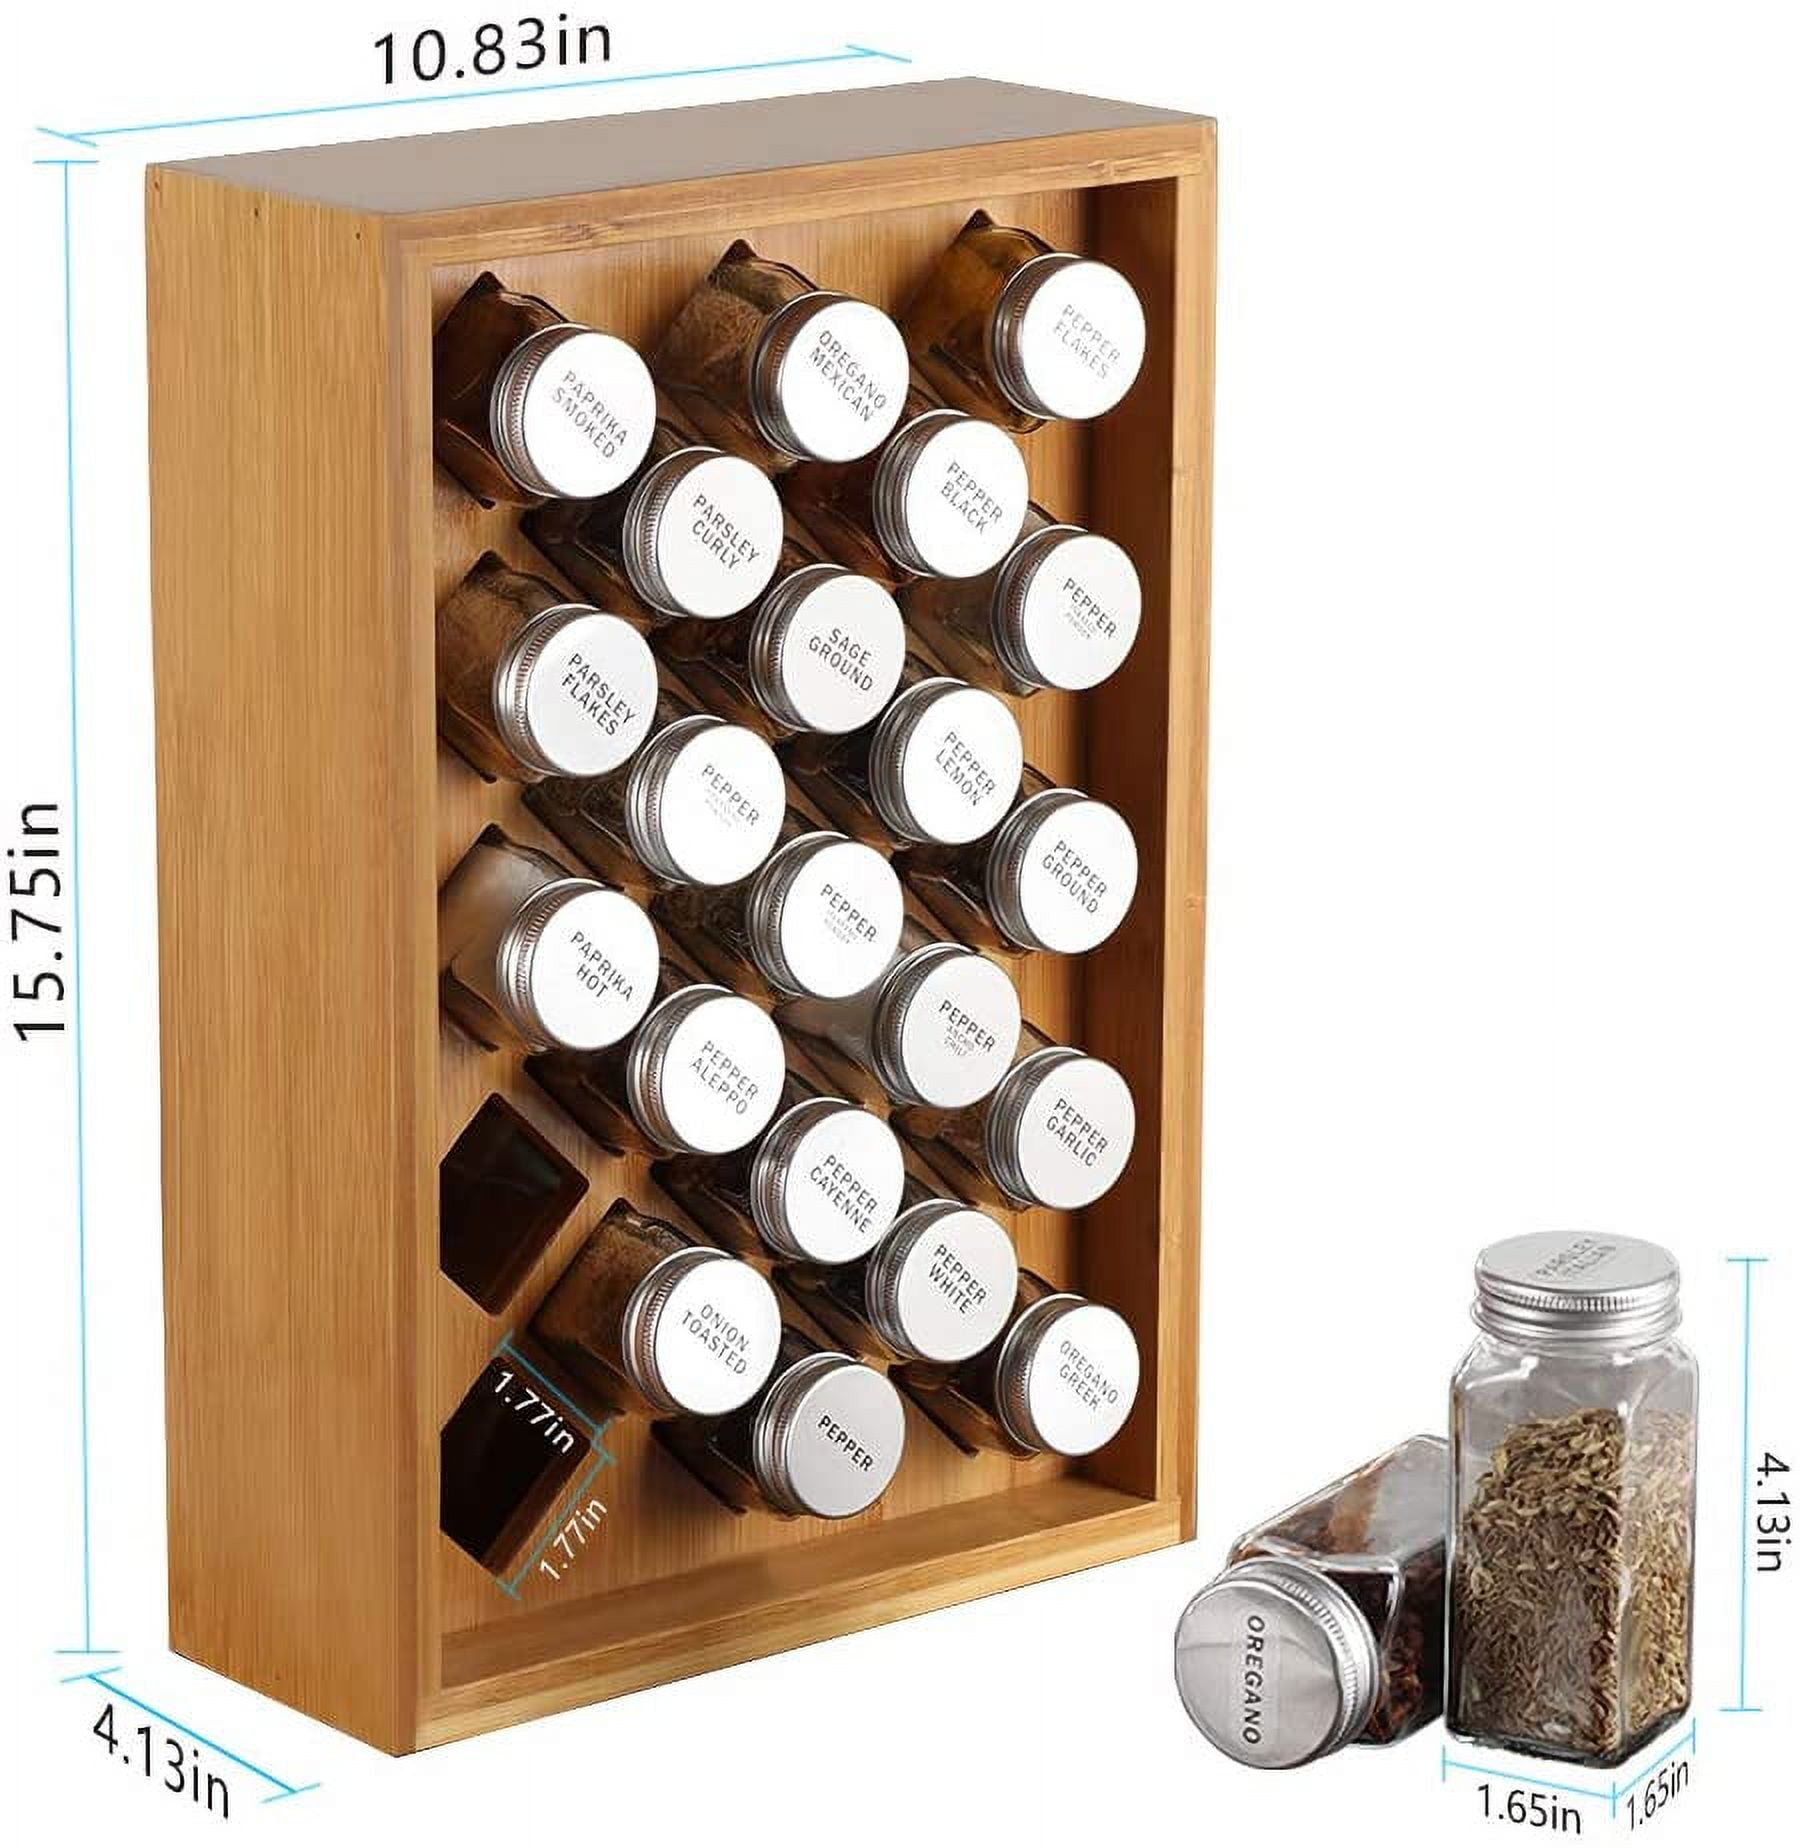 Shop Large Bamboo Shelf with Herb & Spice Jars Pack, Kitchen Organisation